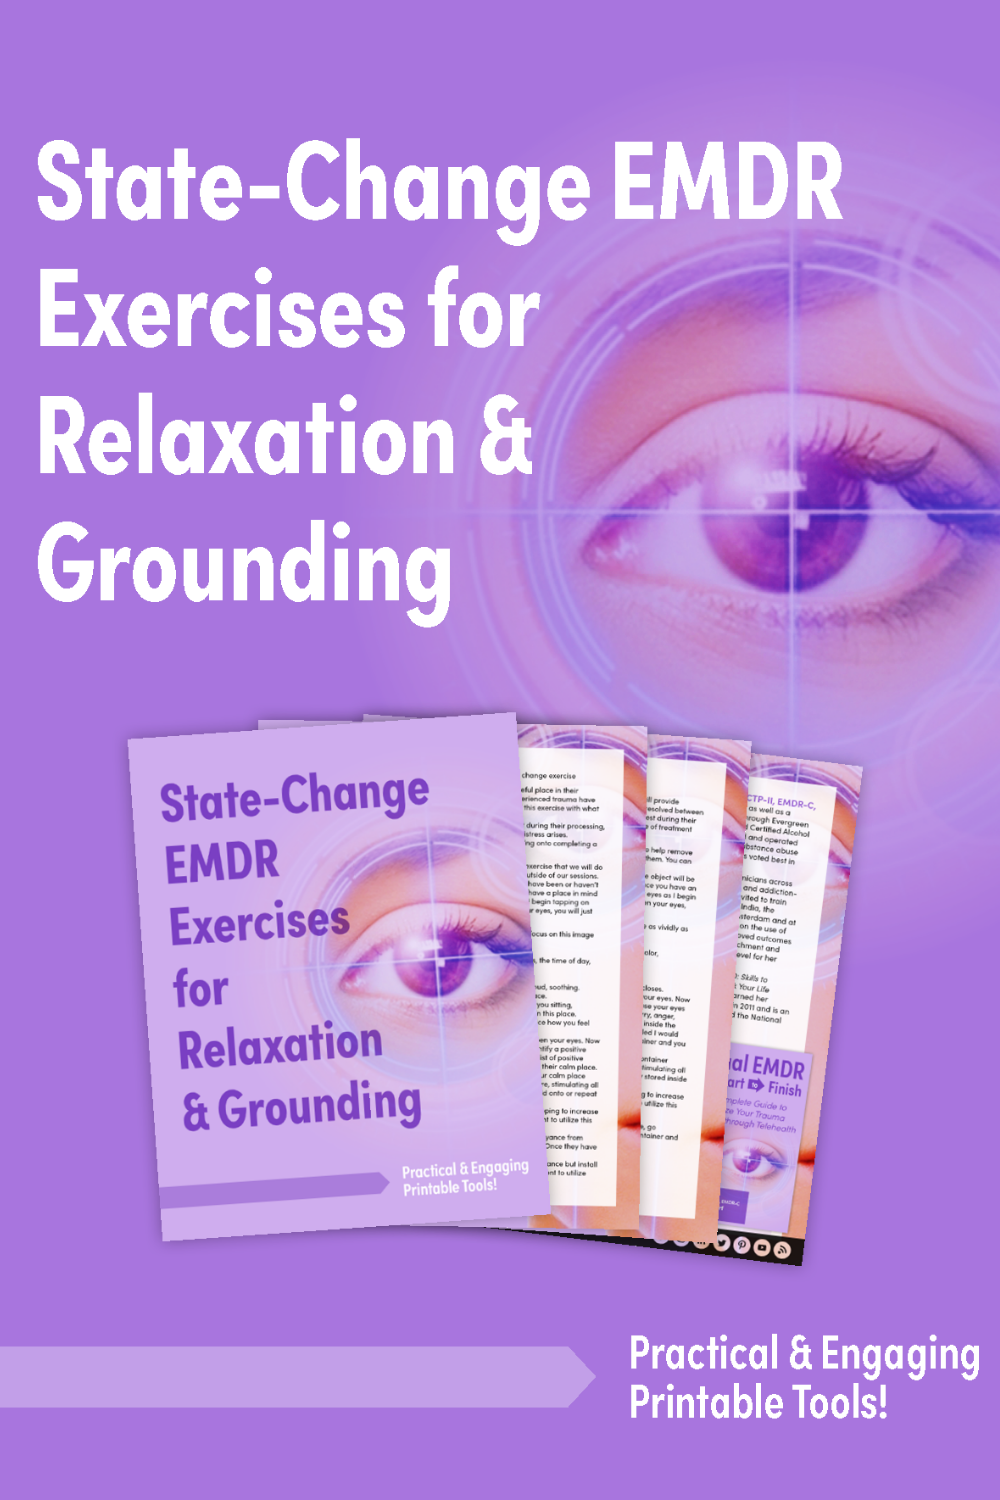 State-Change EMDR Exercises for Relaxation & Grounding